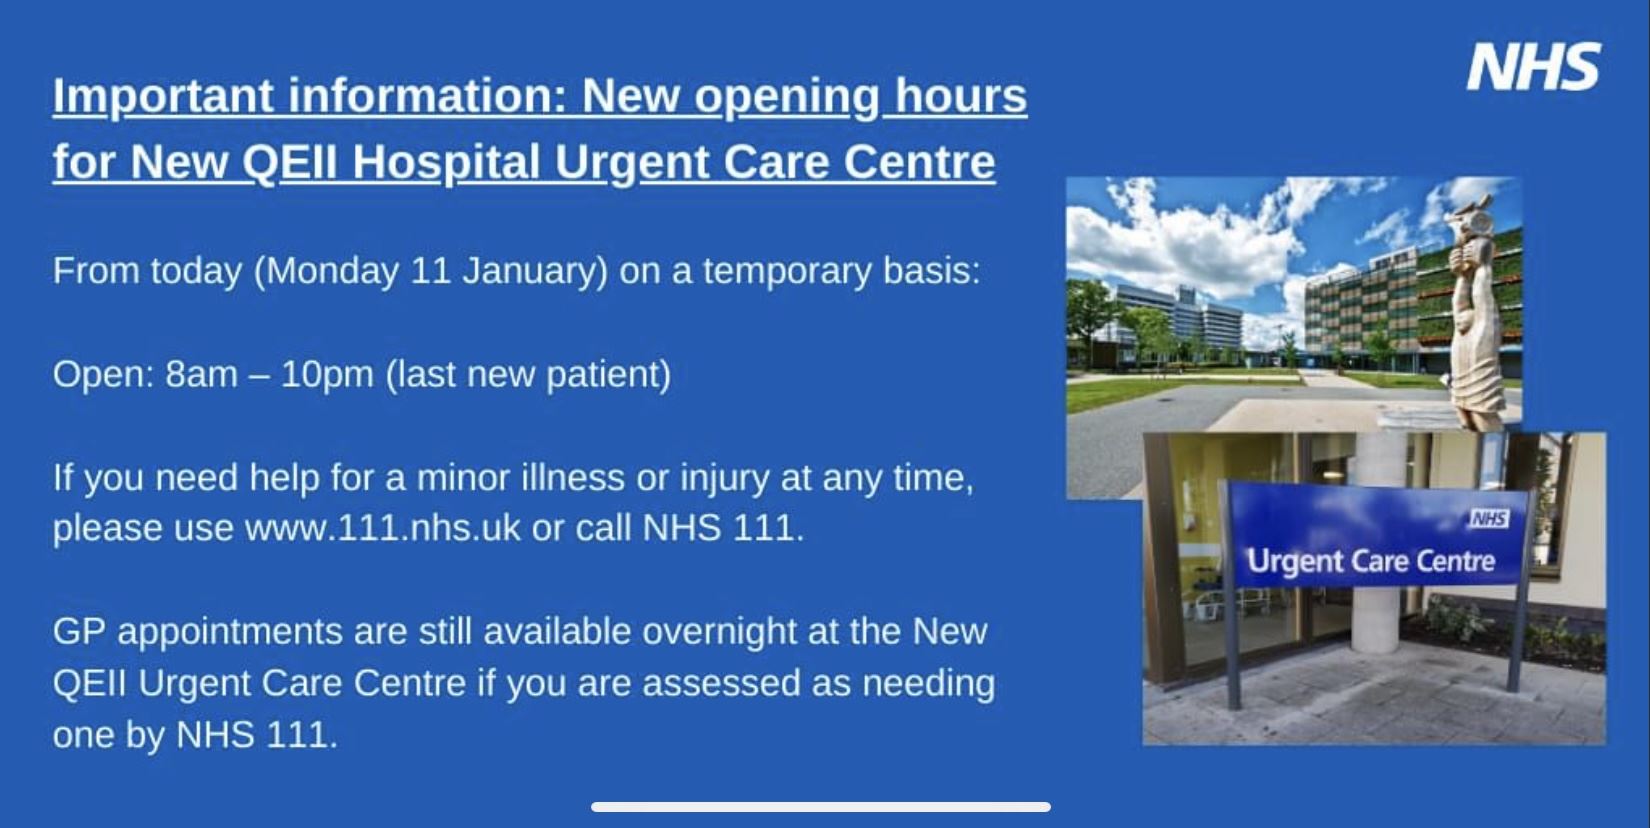 New opening hours for QE2 hospital urgent care centre from 11 January 2021. 8am to 10pm.